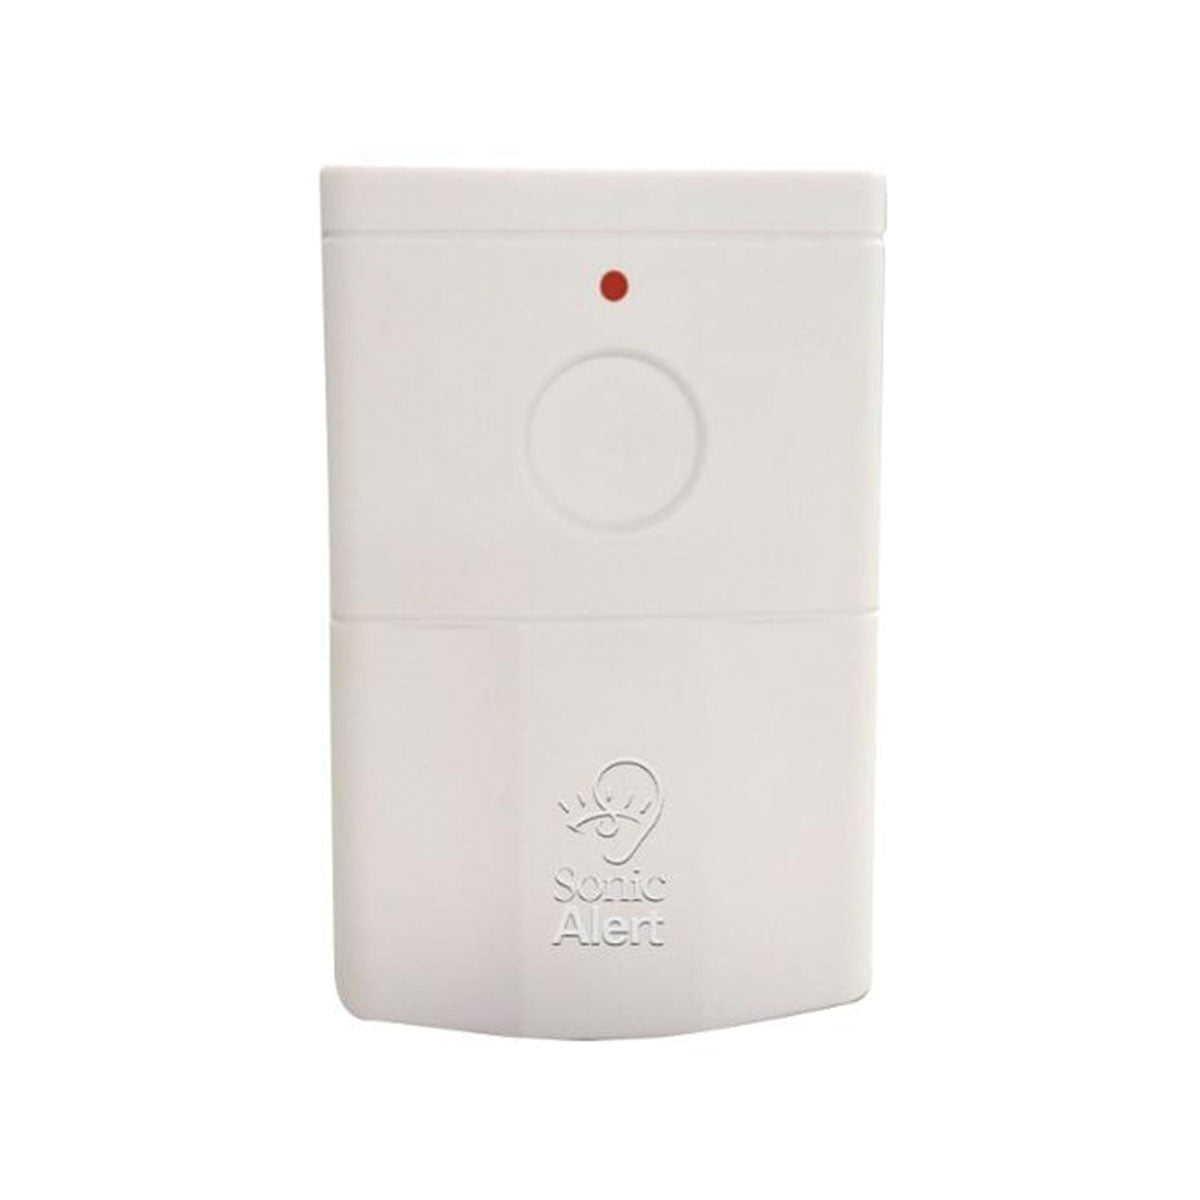 The HomeAware Transmitter HA360SSSCK2.1 Smoke and Carbon Monoxide (CO) Sound  (Optional Accessory) by Sonic Alert